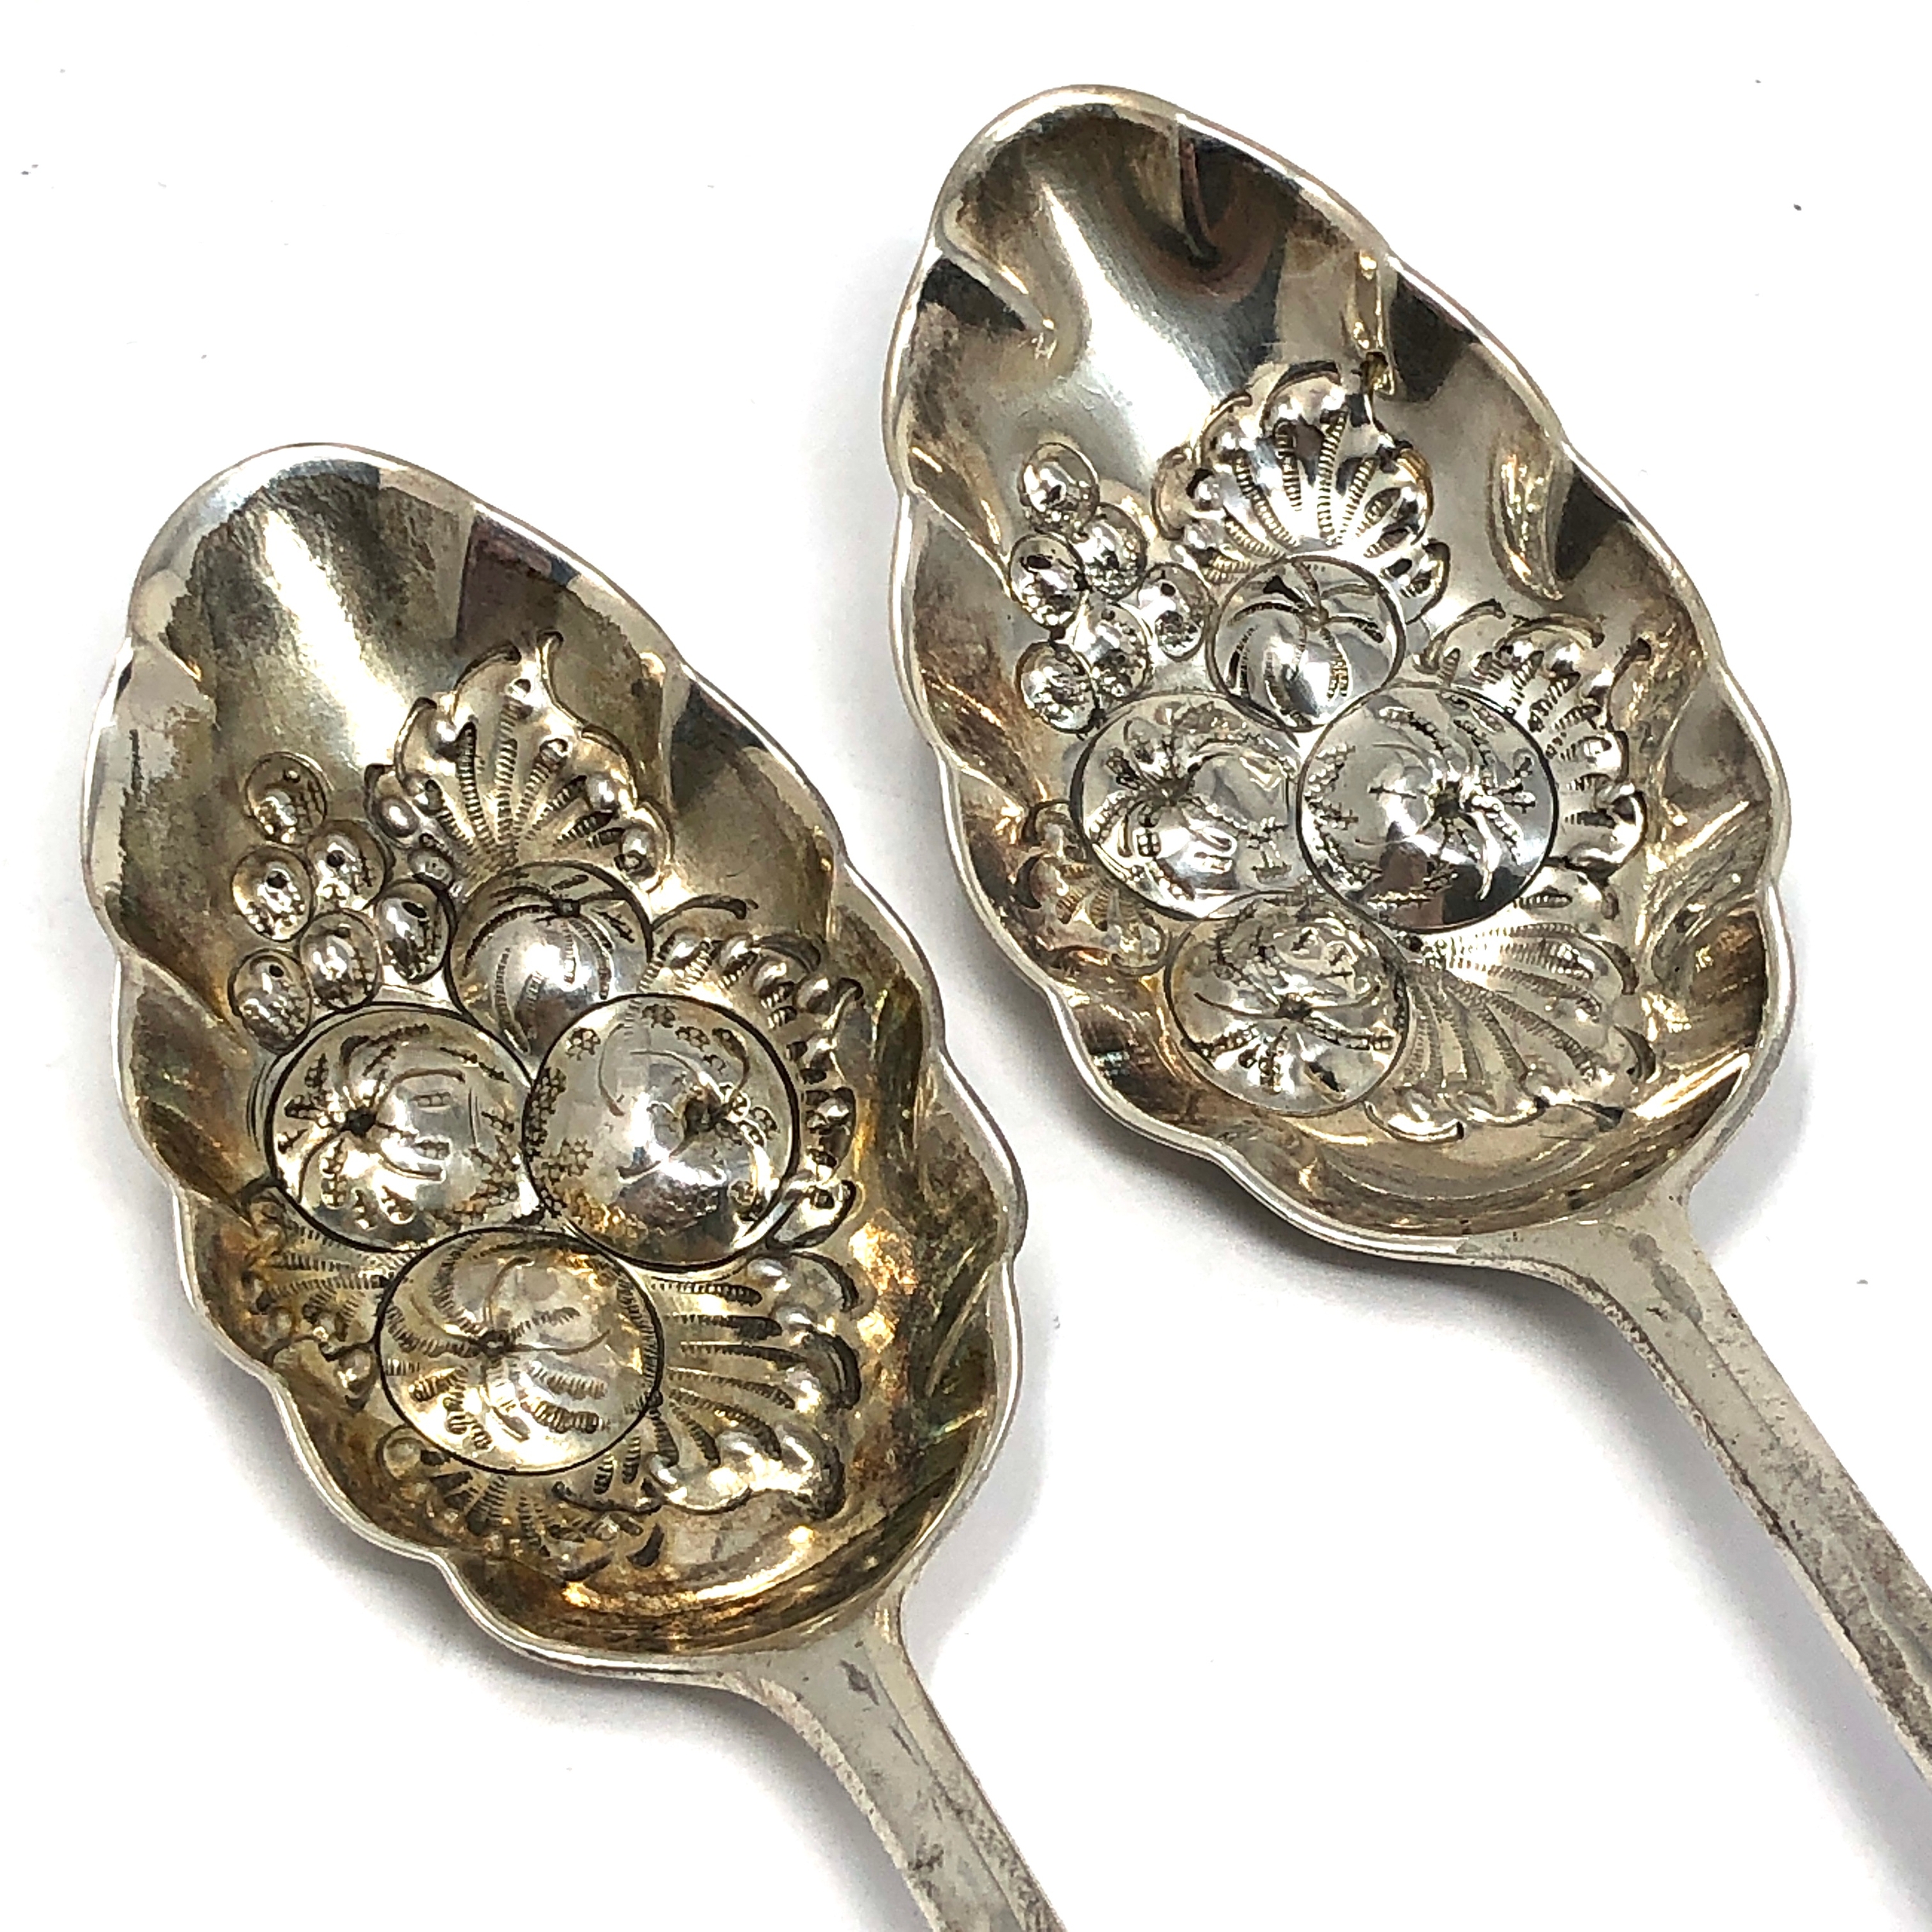 Pair of antique georgian silver berry spoons London silver hallmarks weight 123g each measure approx - Image 4 of 5